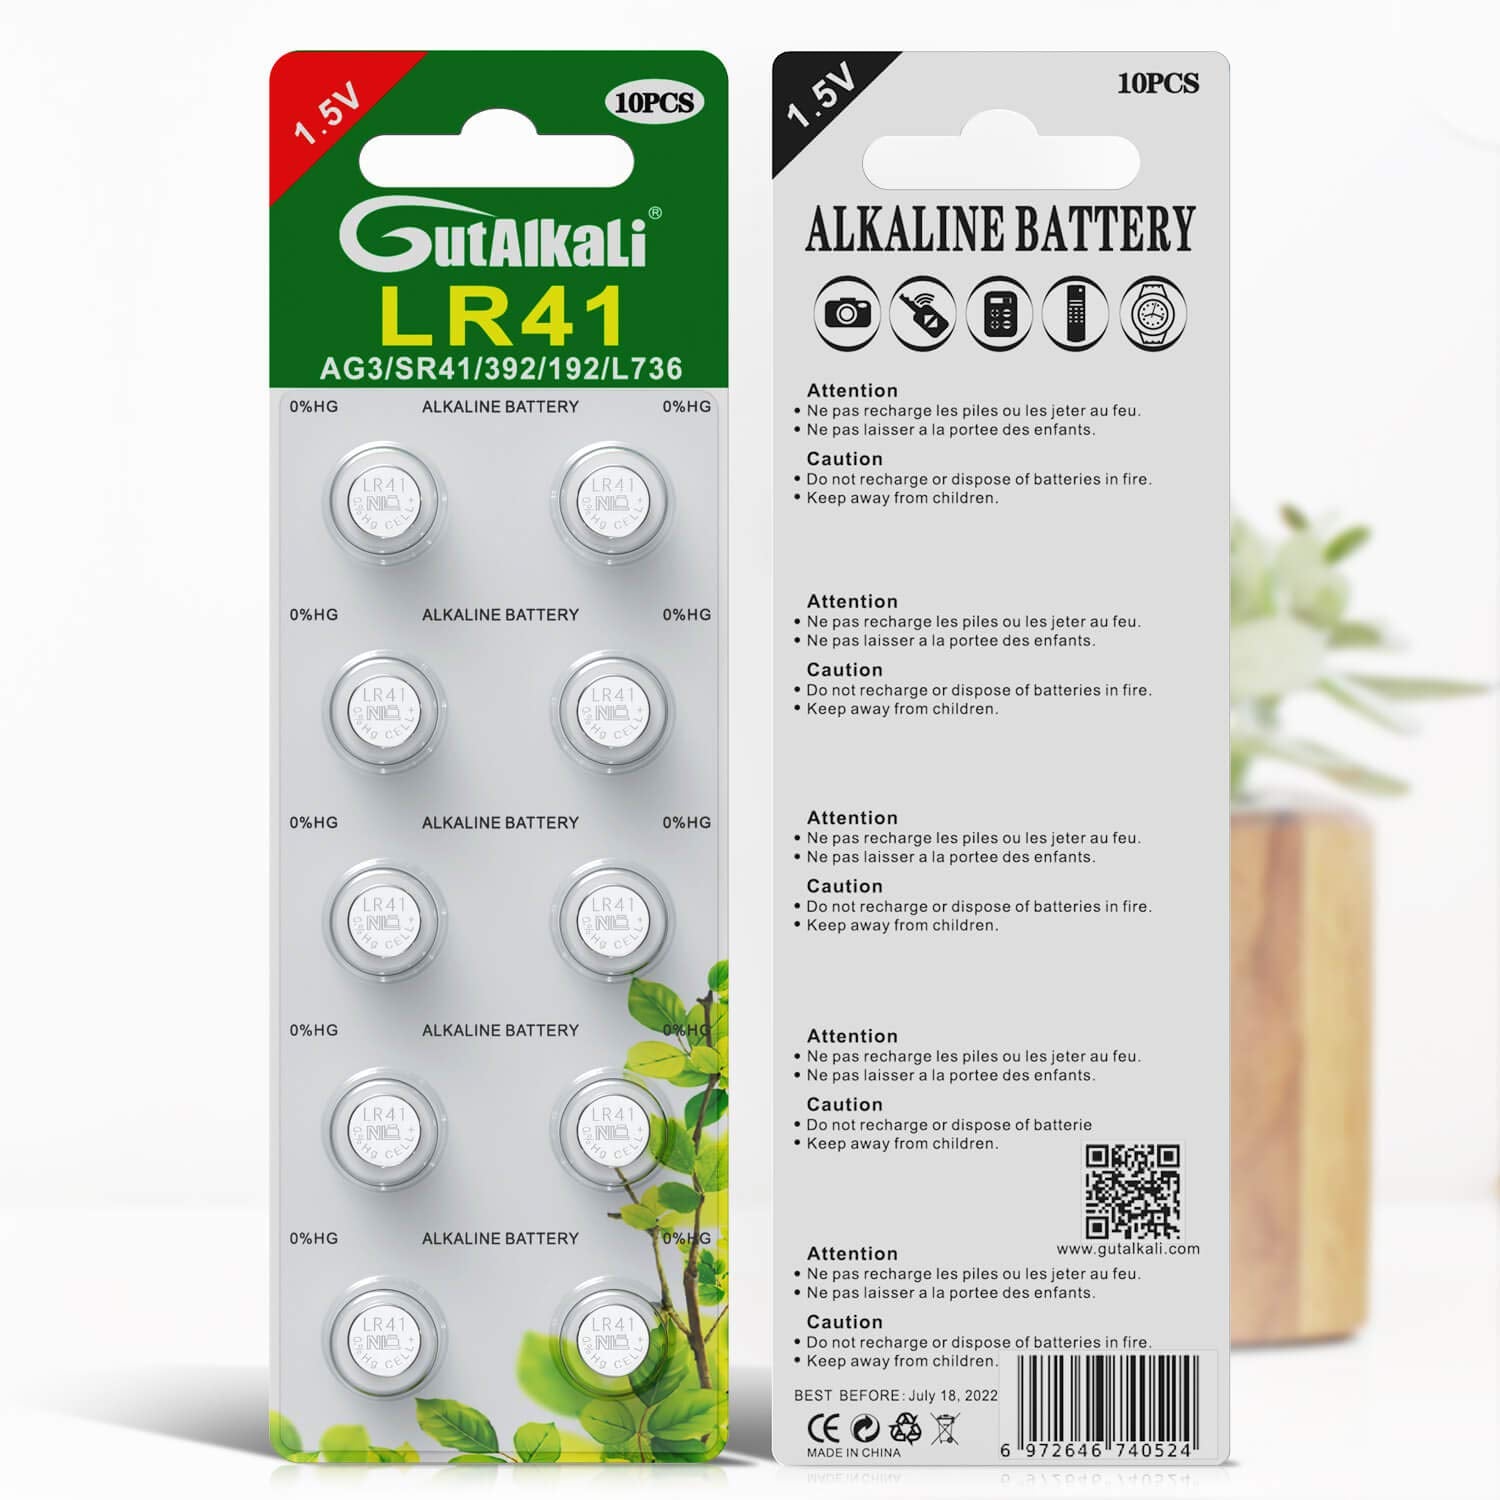 GutAlkaLi LR41 Battery Pack of 20 – 1.5V AG3 Batteries for Watches, Hearing Aids, Glucometer, Key Fobs and Small Electronics – Silver Oxide Chemistry Provides Stable Voltage and Long Lifespan